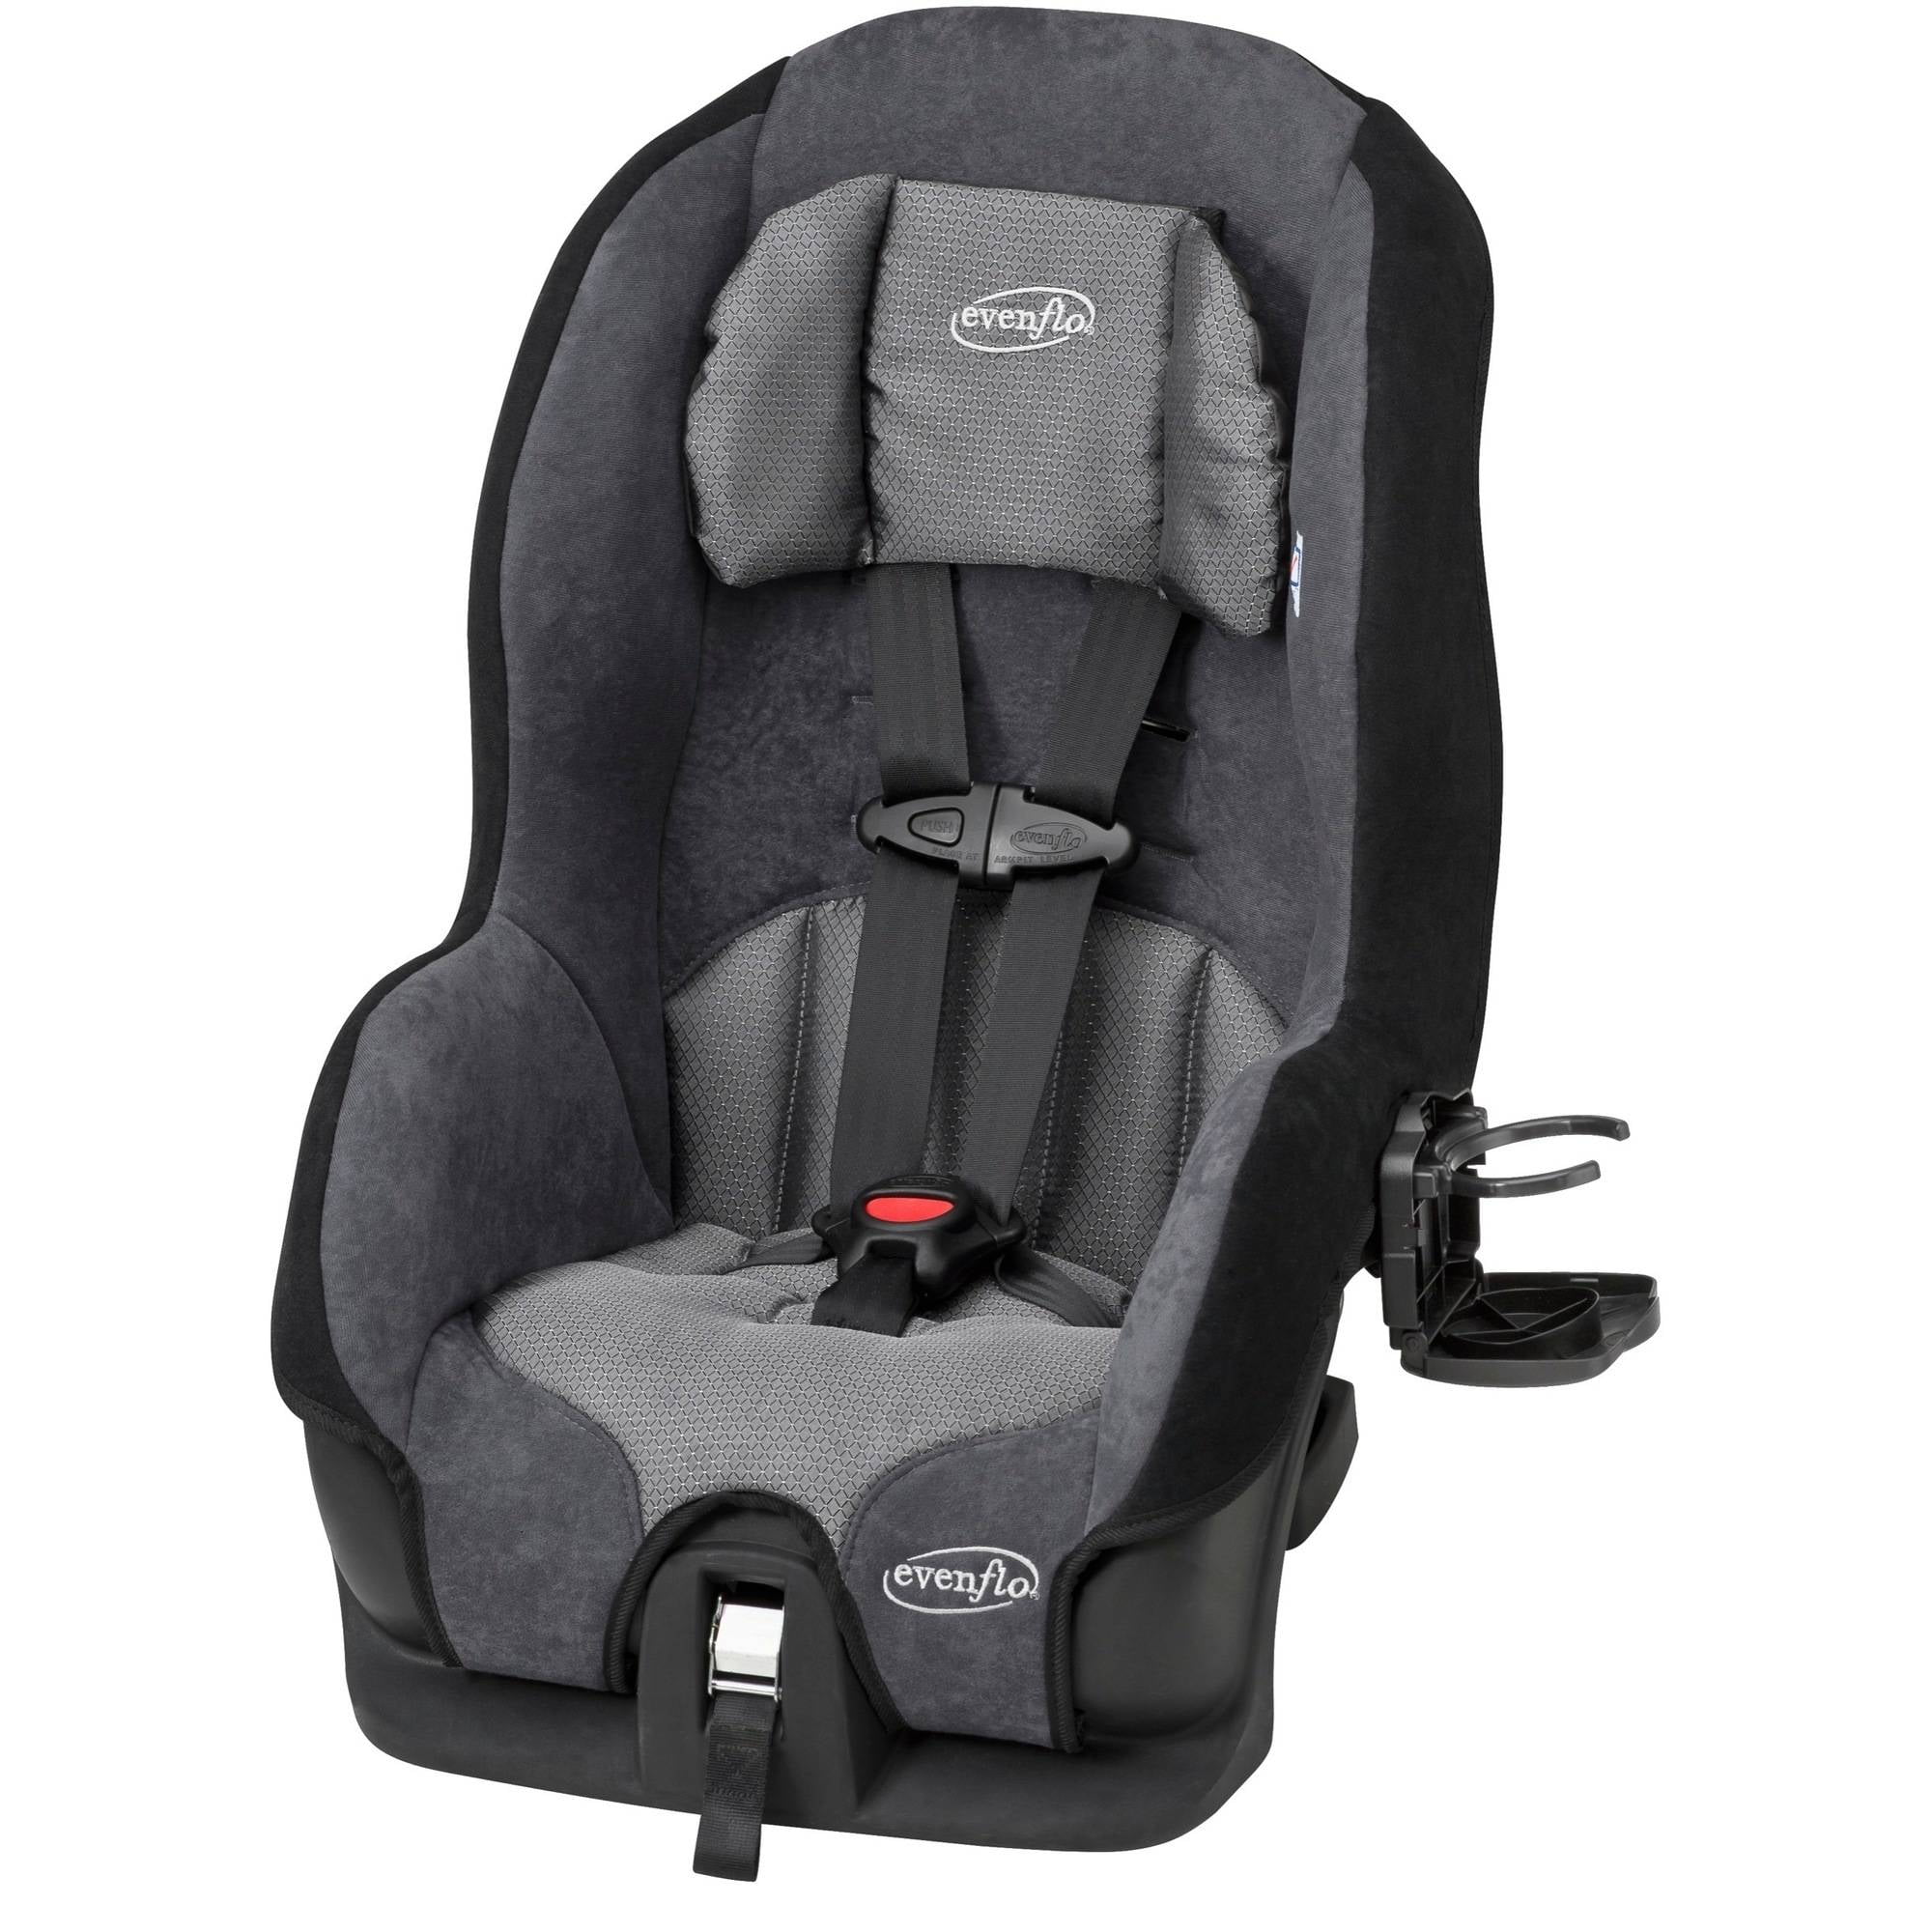 Photo 1 of ***USED AND DIRTY***
Evenflo Tribute LX Harness Convertible Car Seat, Solid Print Gray